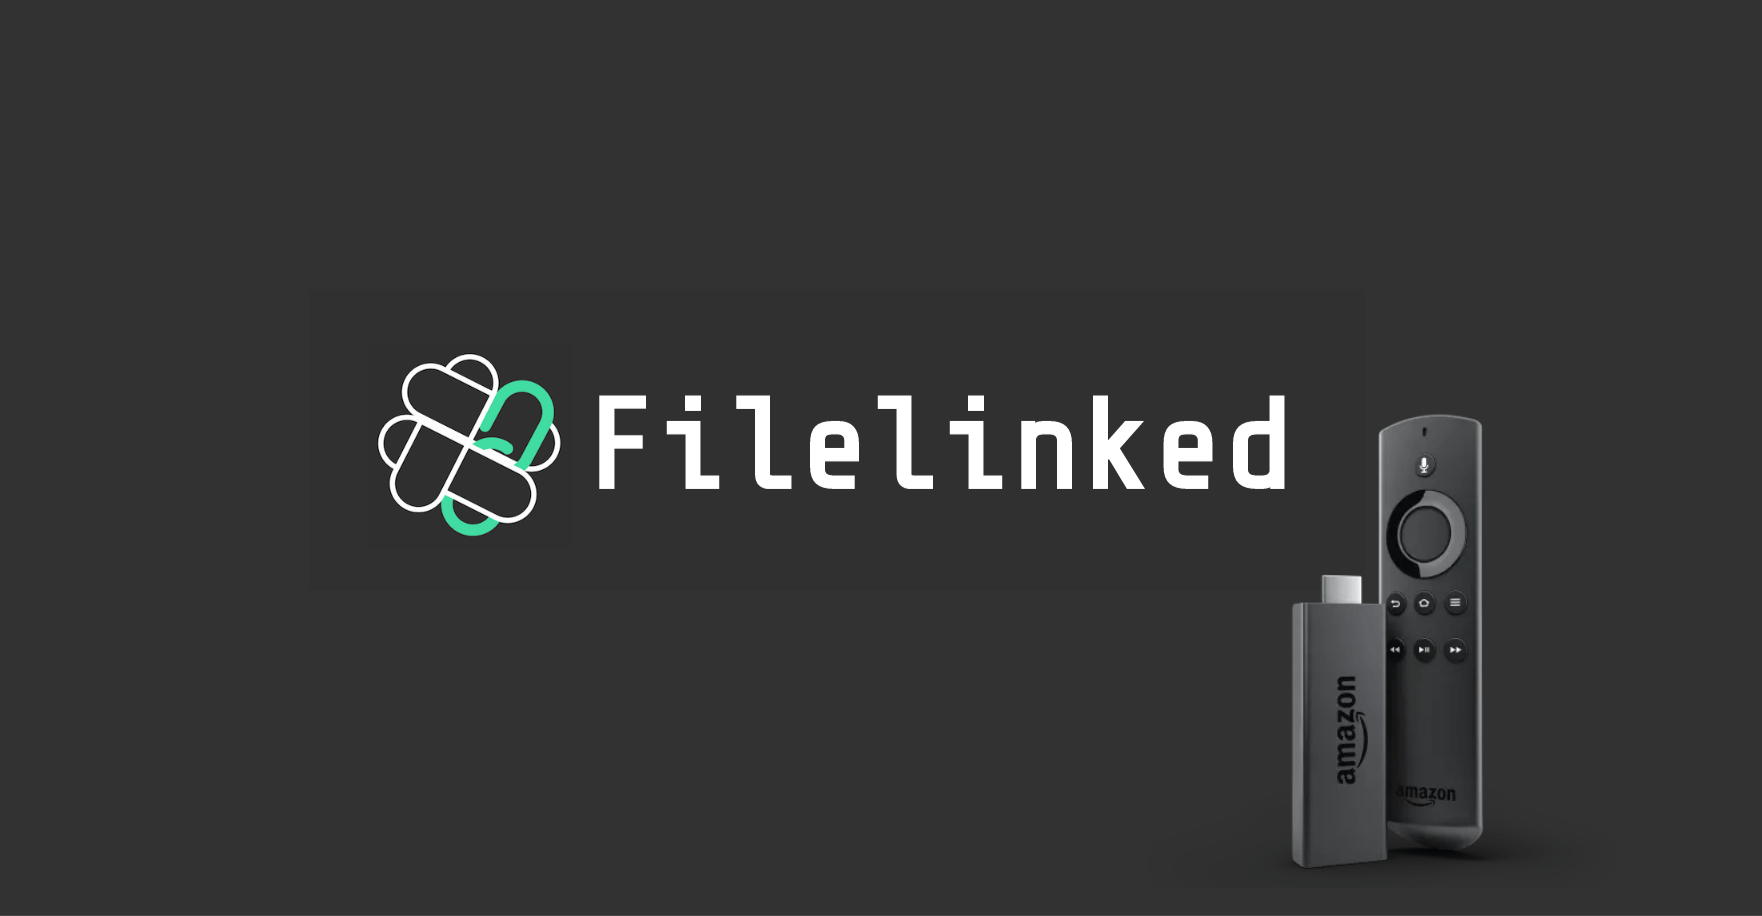 How to Download FileLinked on Firestick / Fire TV / Android